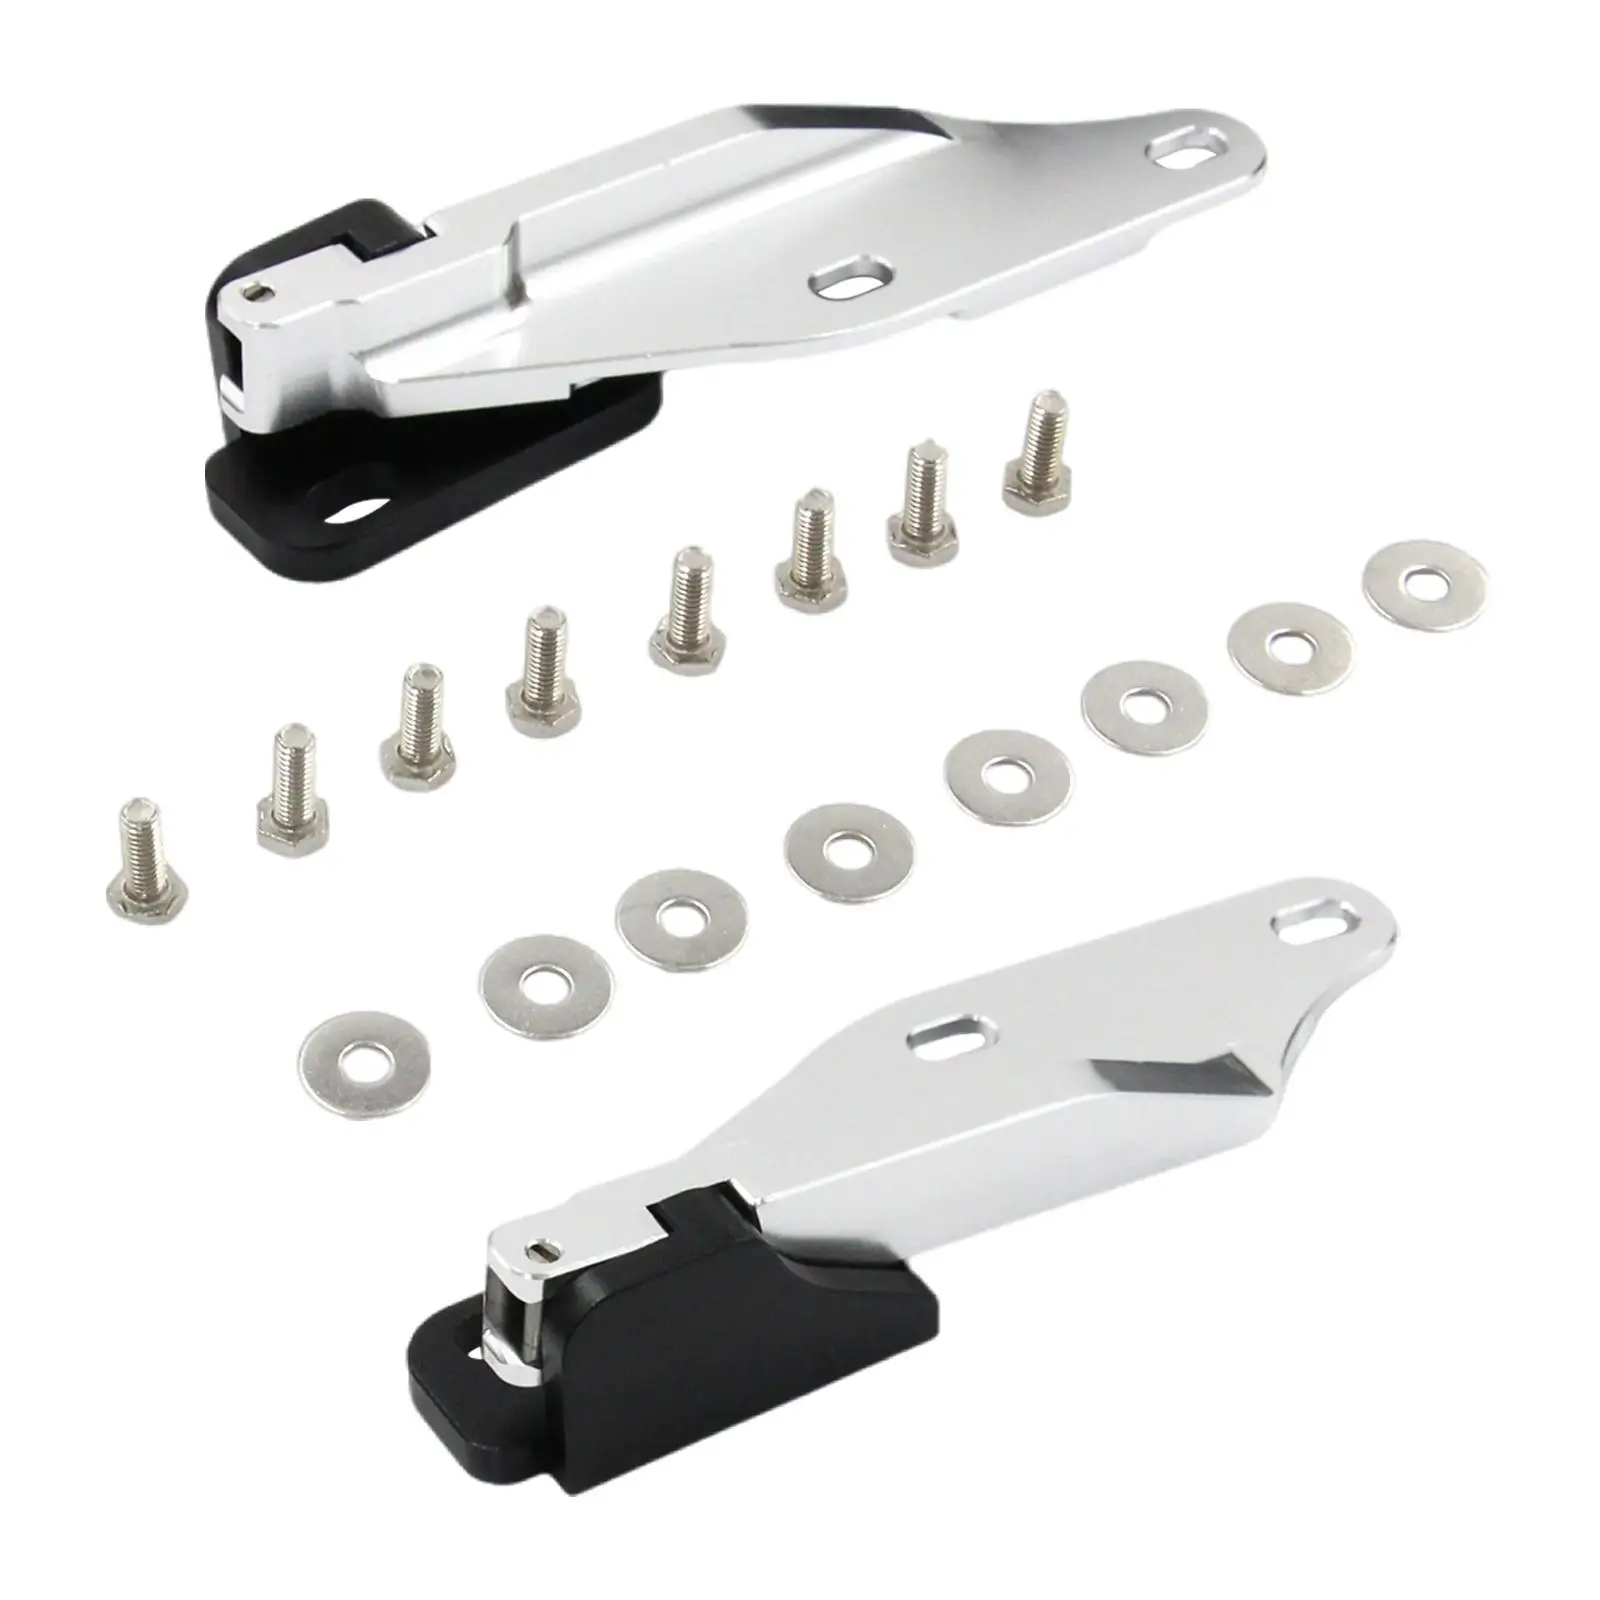 2 Pieces Quick Release Hood Hinge Bonnet Latch Easy to Install High Strength Aluminum Alloy Parts for Honda Modification